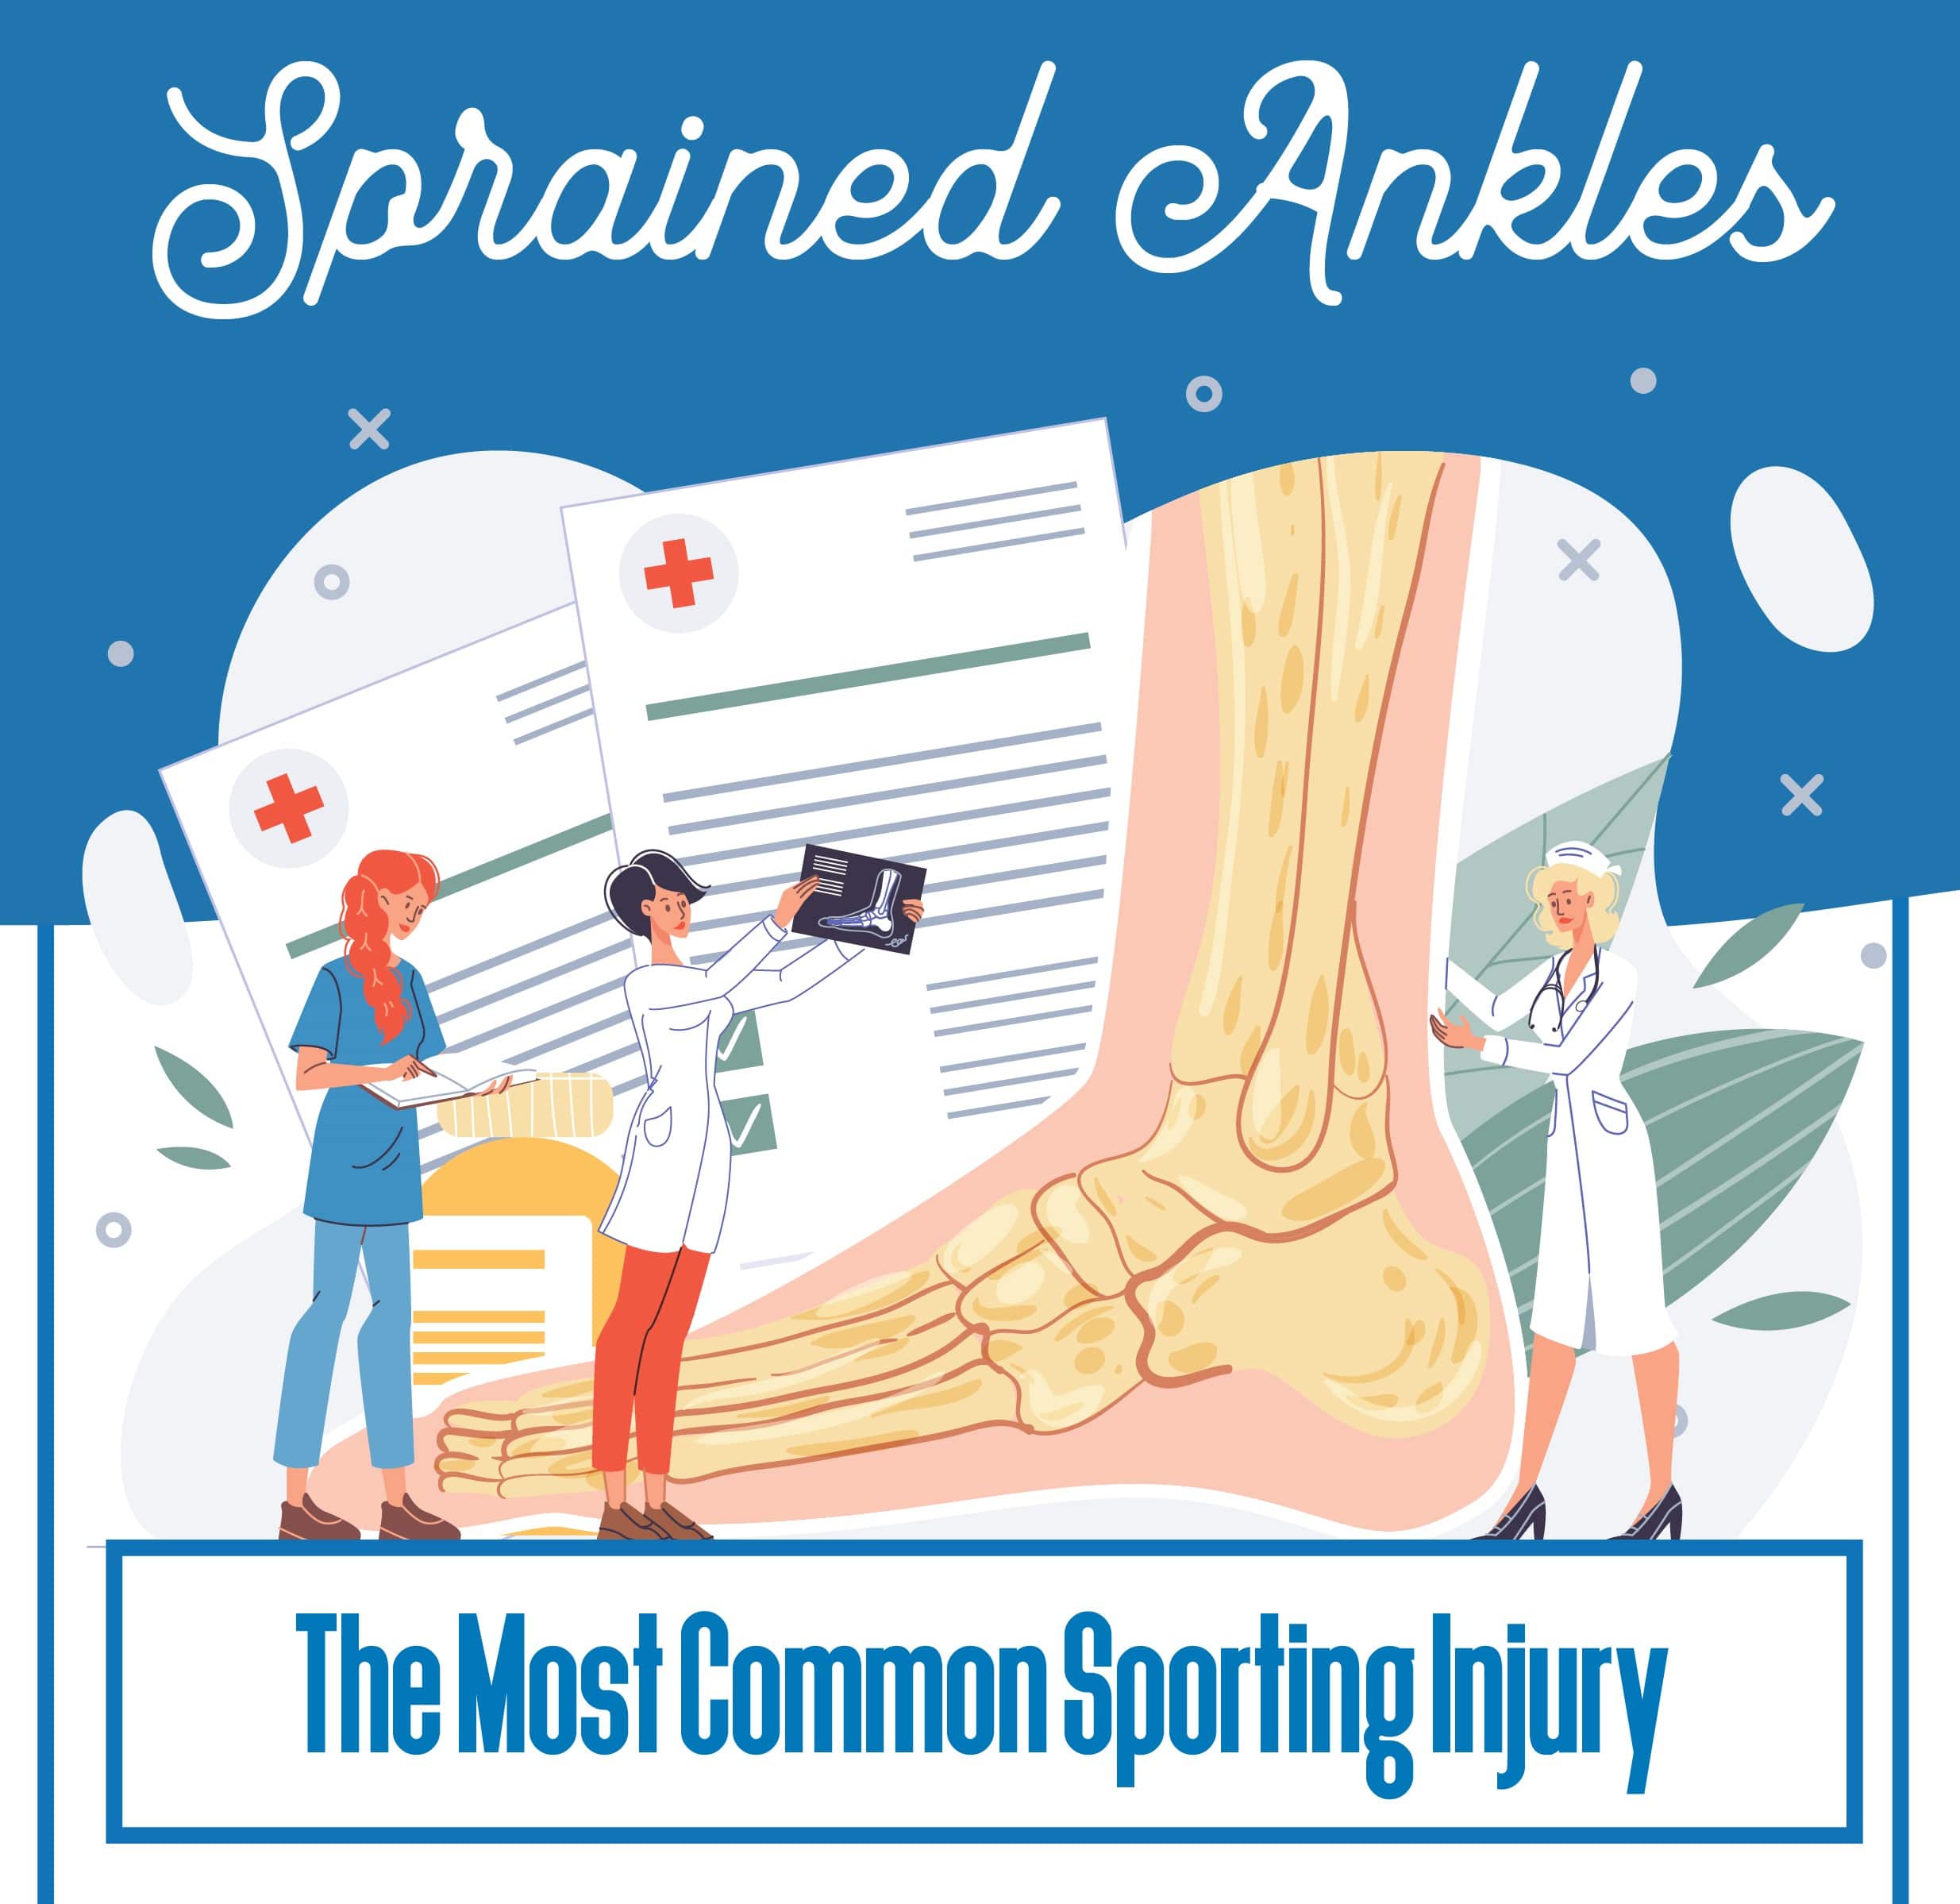 Sprained Ankles - The Most Common Sports Injury - Healing Hands ...